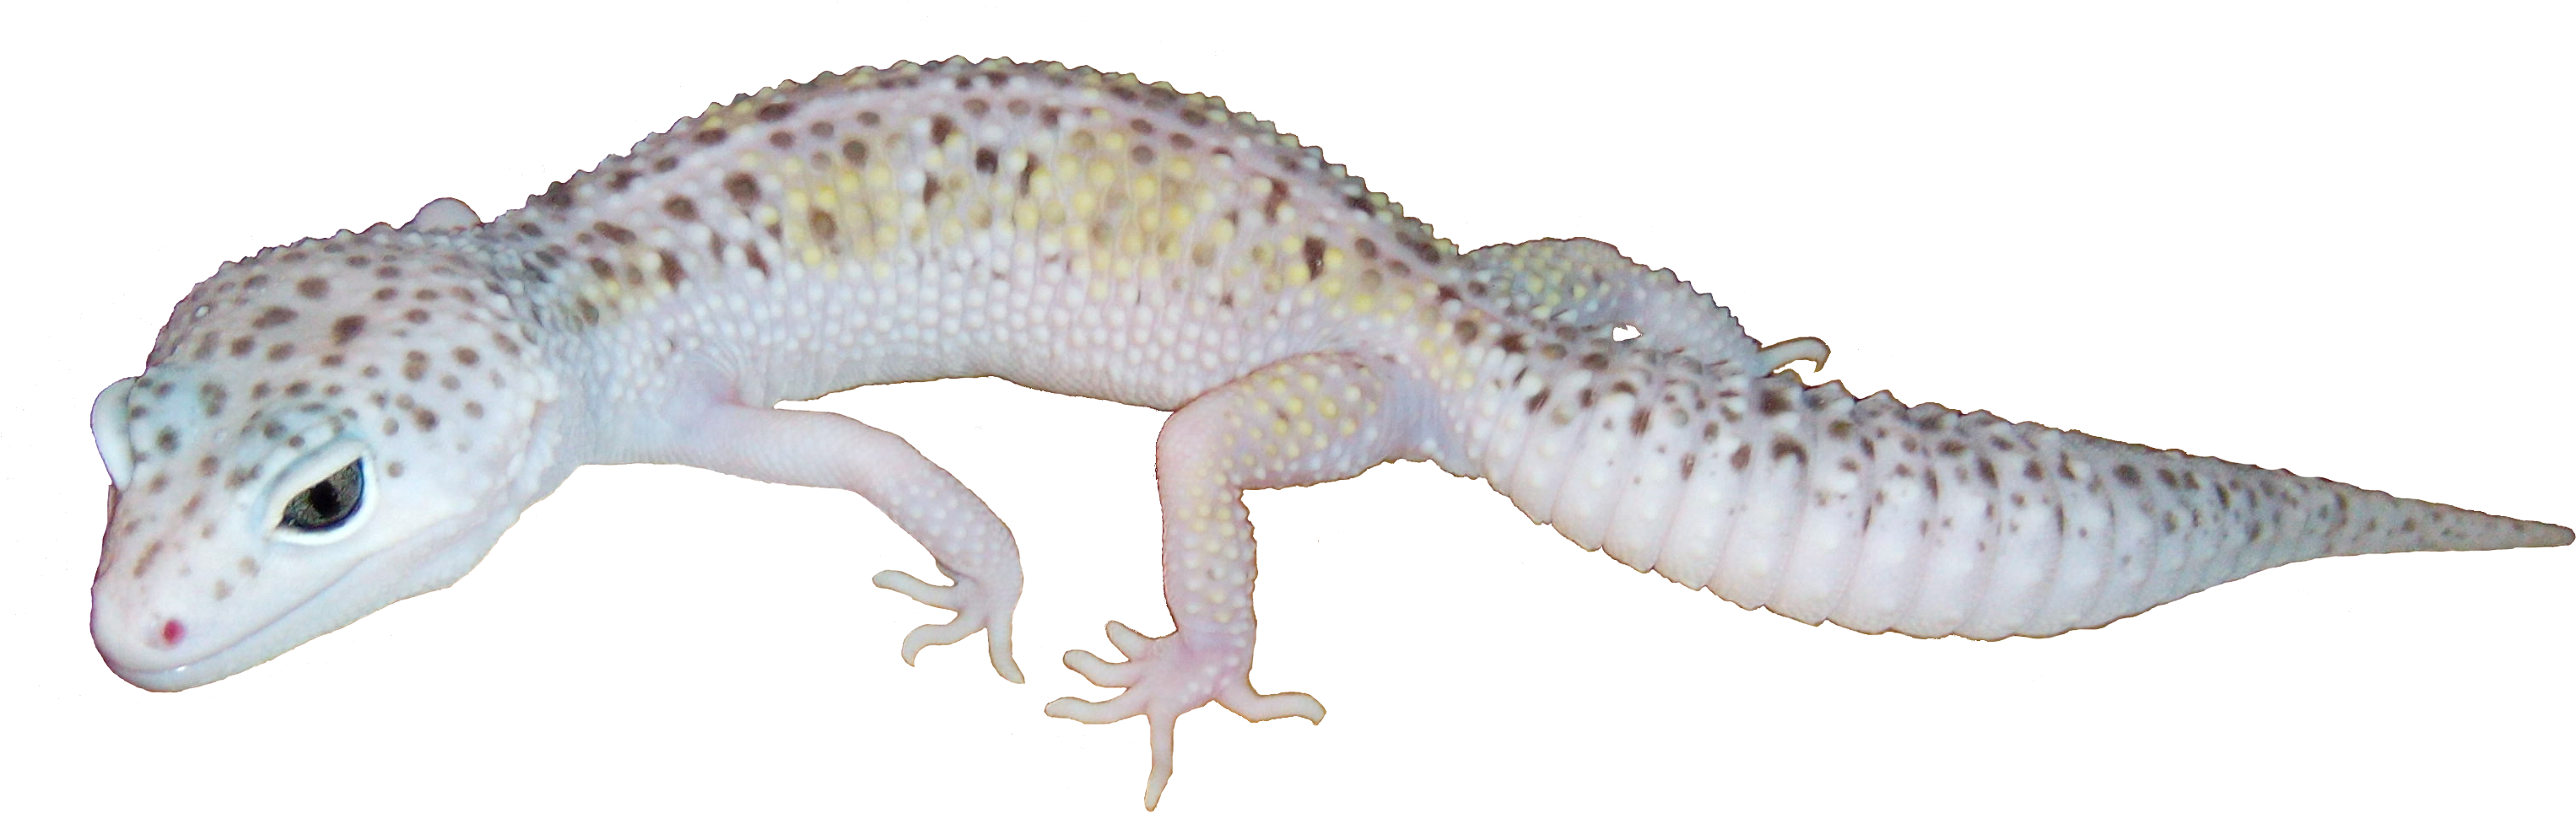 Leopard Gecko Isolatedon White PNG